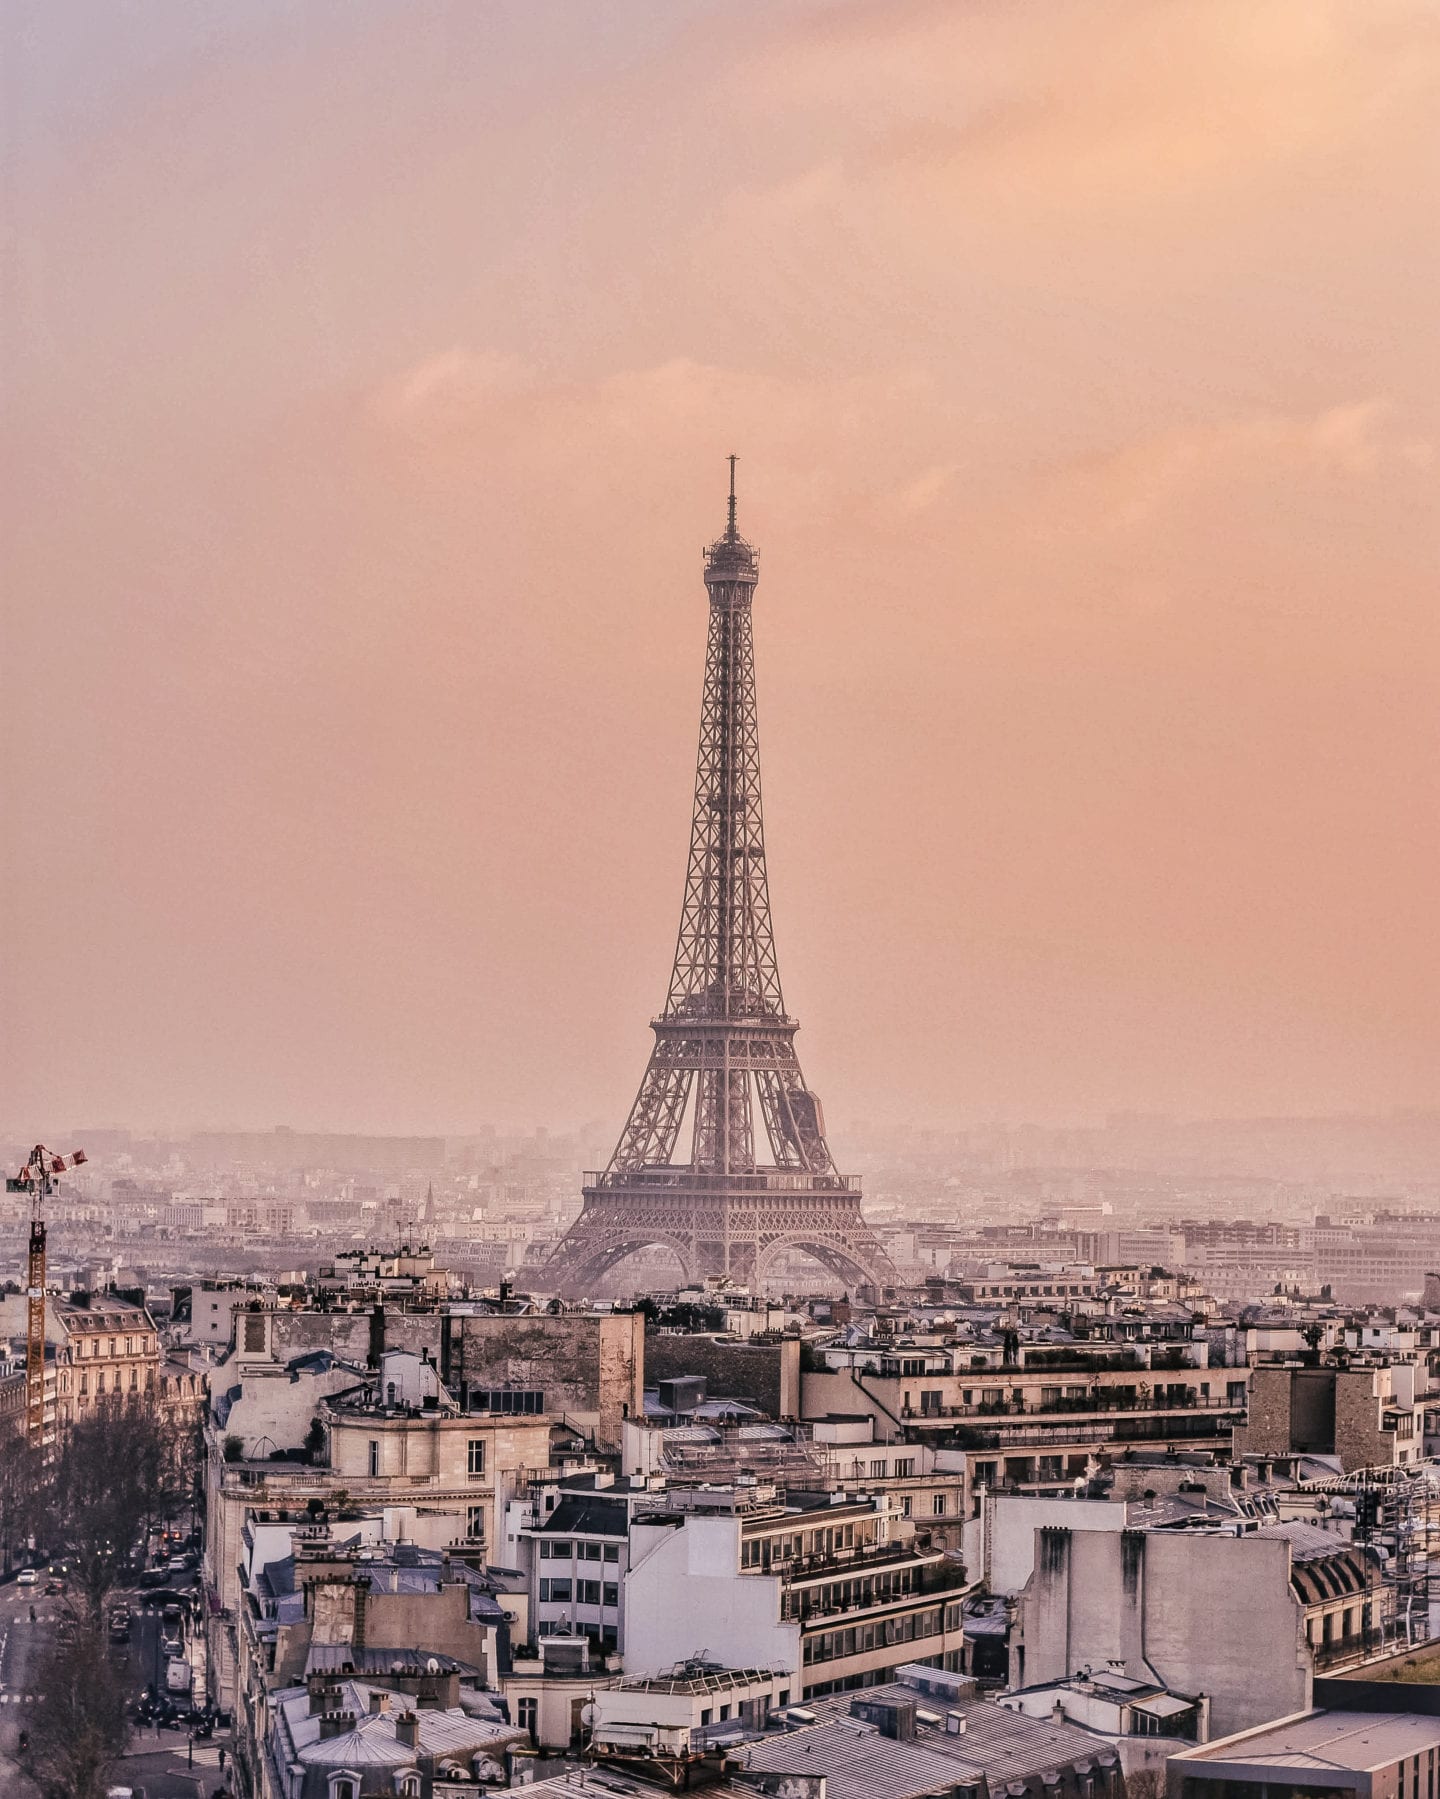 The seven best places in Paris to view the Eiffel Tower